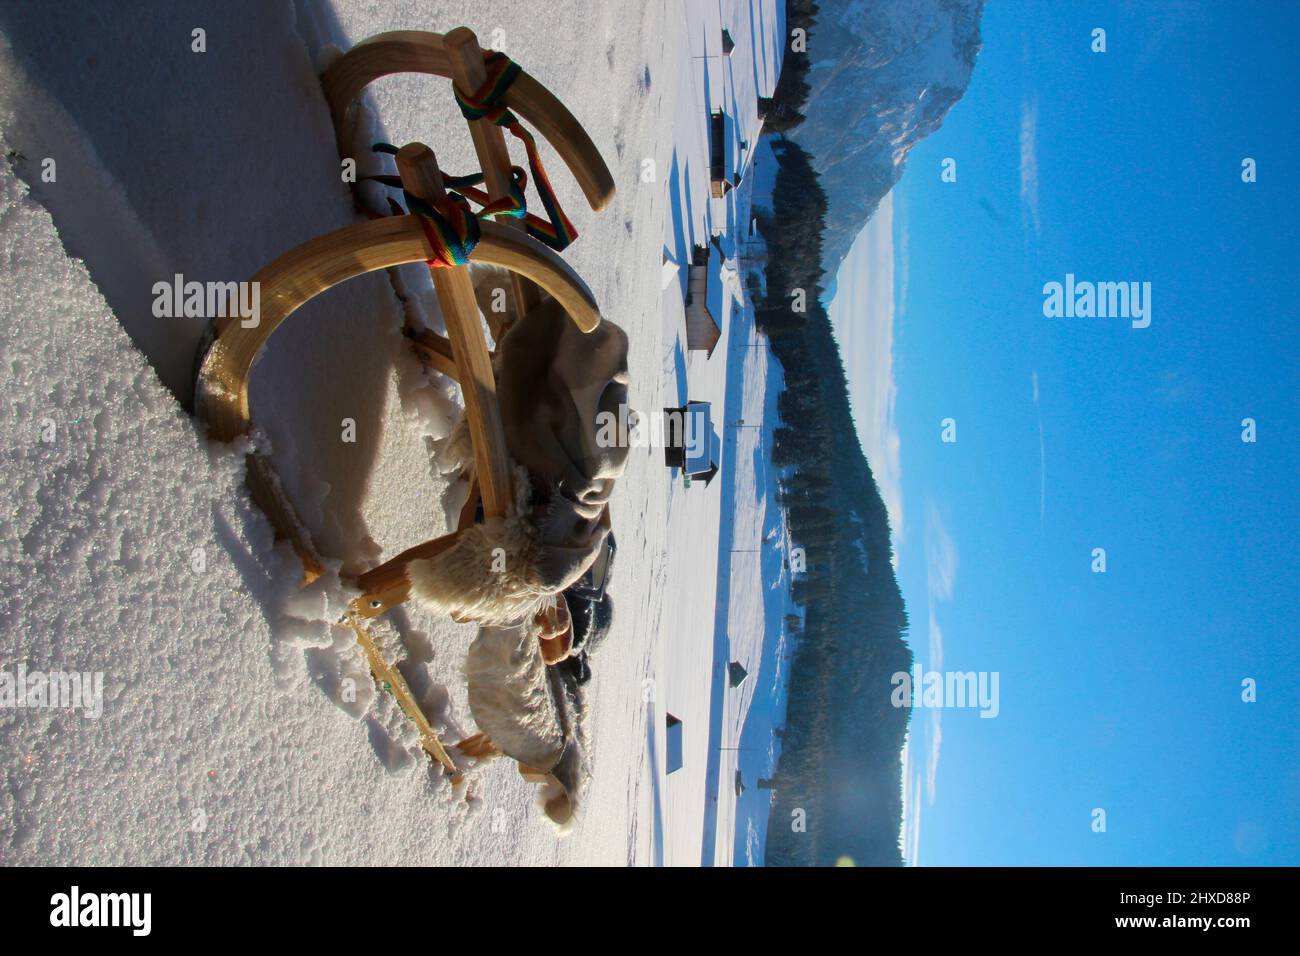 Winter hike near Mittenwald, sledding in front of mountain scenery in the snow, Bavaria, Upper Bavaria, Germany, vacation, winter, Stock Photo